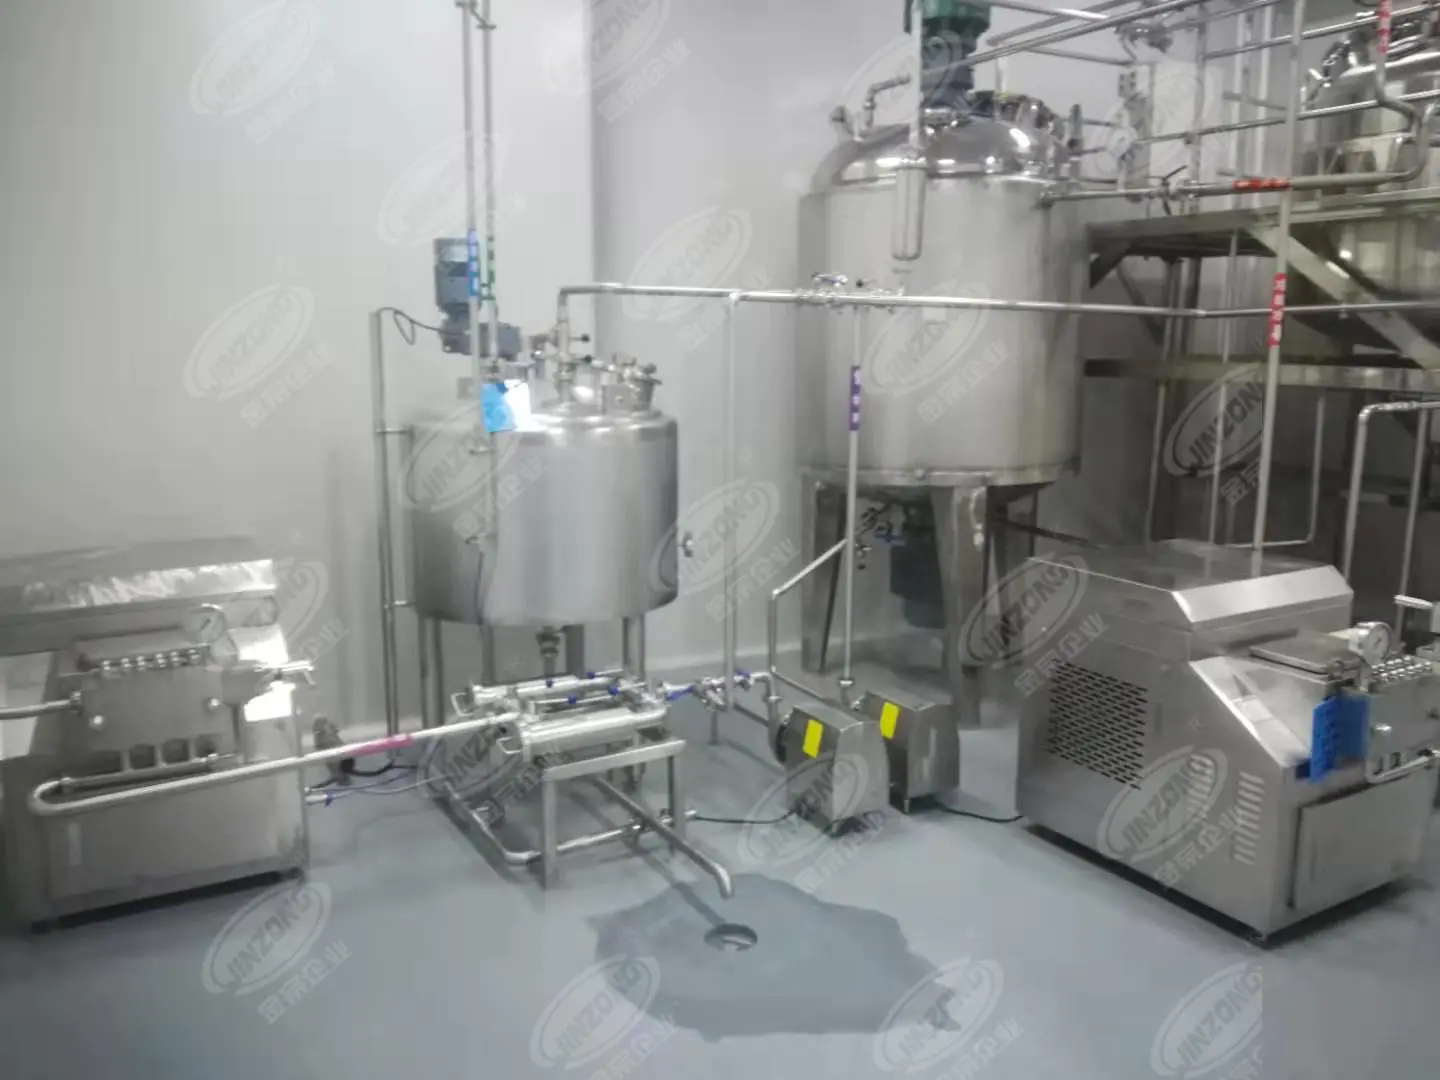 customized mixing food machine supply for pharmaceutical